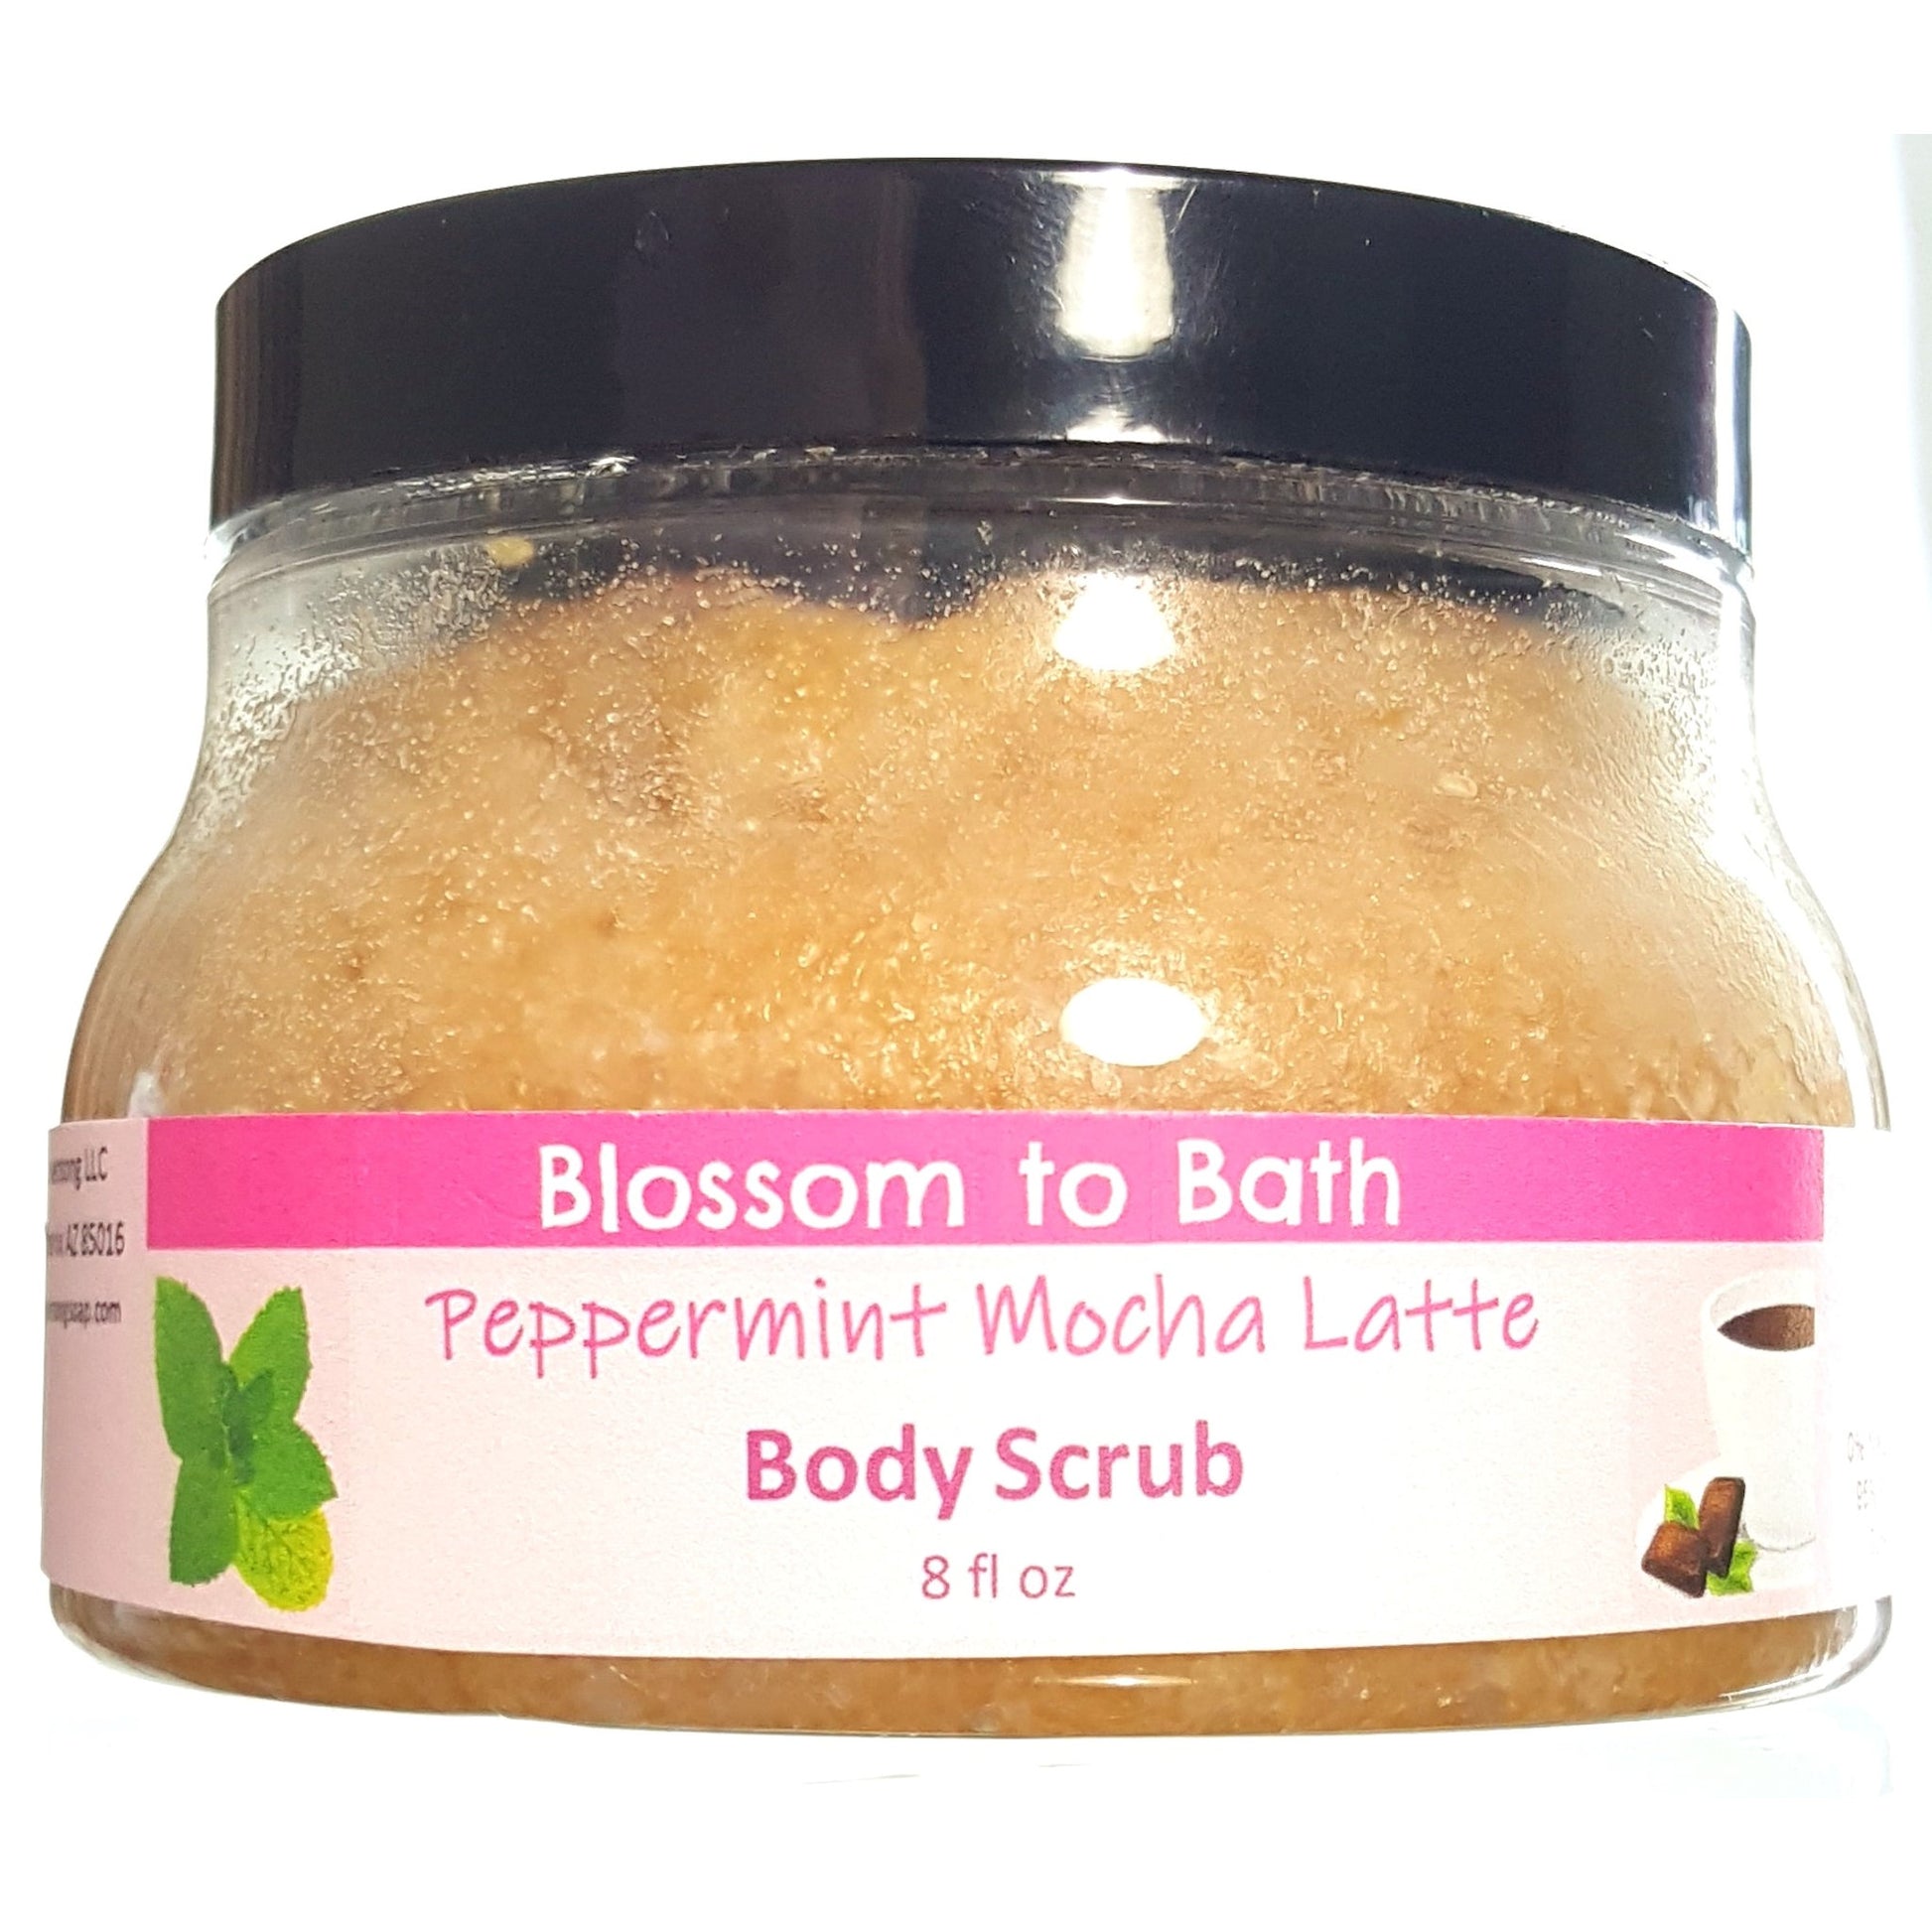 Buy Blossom to Bath Peppermint Mocha Latte Body Scrub from Flowersong Soap Studio.  Large crystal turbinado sugar plus  rich oils conveniently exfoliate and moisturize in one step  A confectionary blend of fresh mint, rich fudge, and coffee.